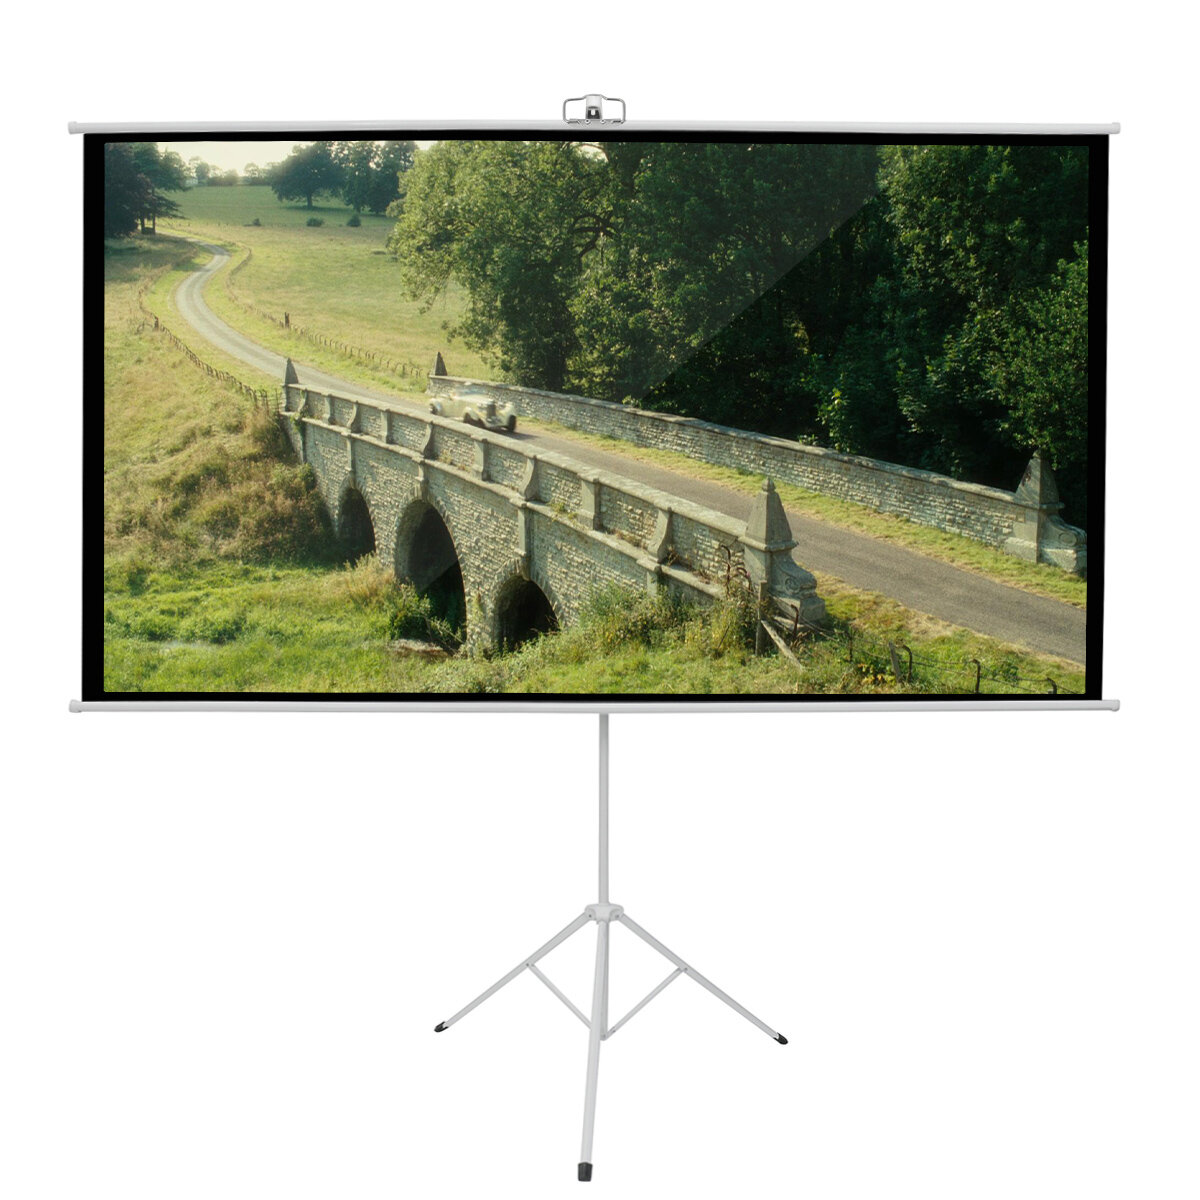 Image of 100-inch 16:9/4:3 Projector Screen with Tripod Stand Glass Fiber HD Projection Screen for Home Office Theater Movies Ind